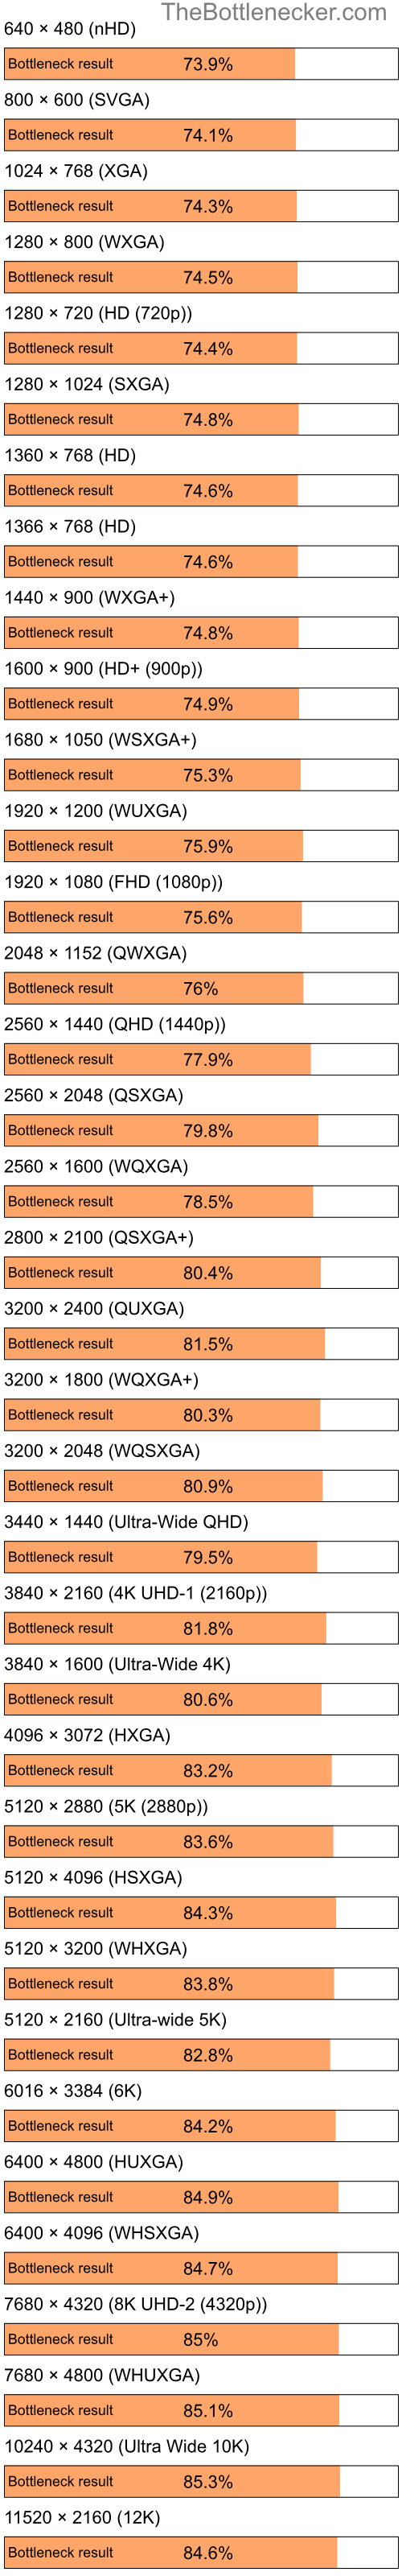 Bottleneck results by resolution for Intel Pentium 4 and AMD Radeon X1550 in Graphic Card Intense Tasks